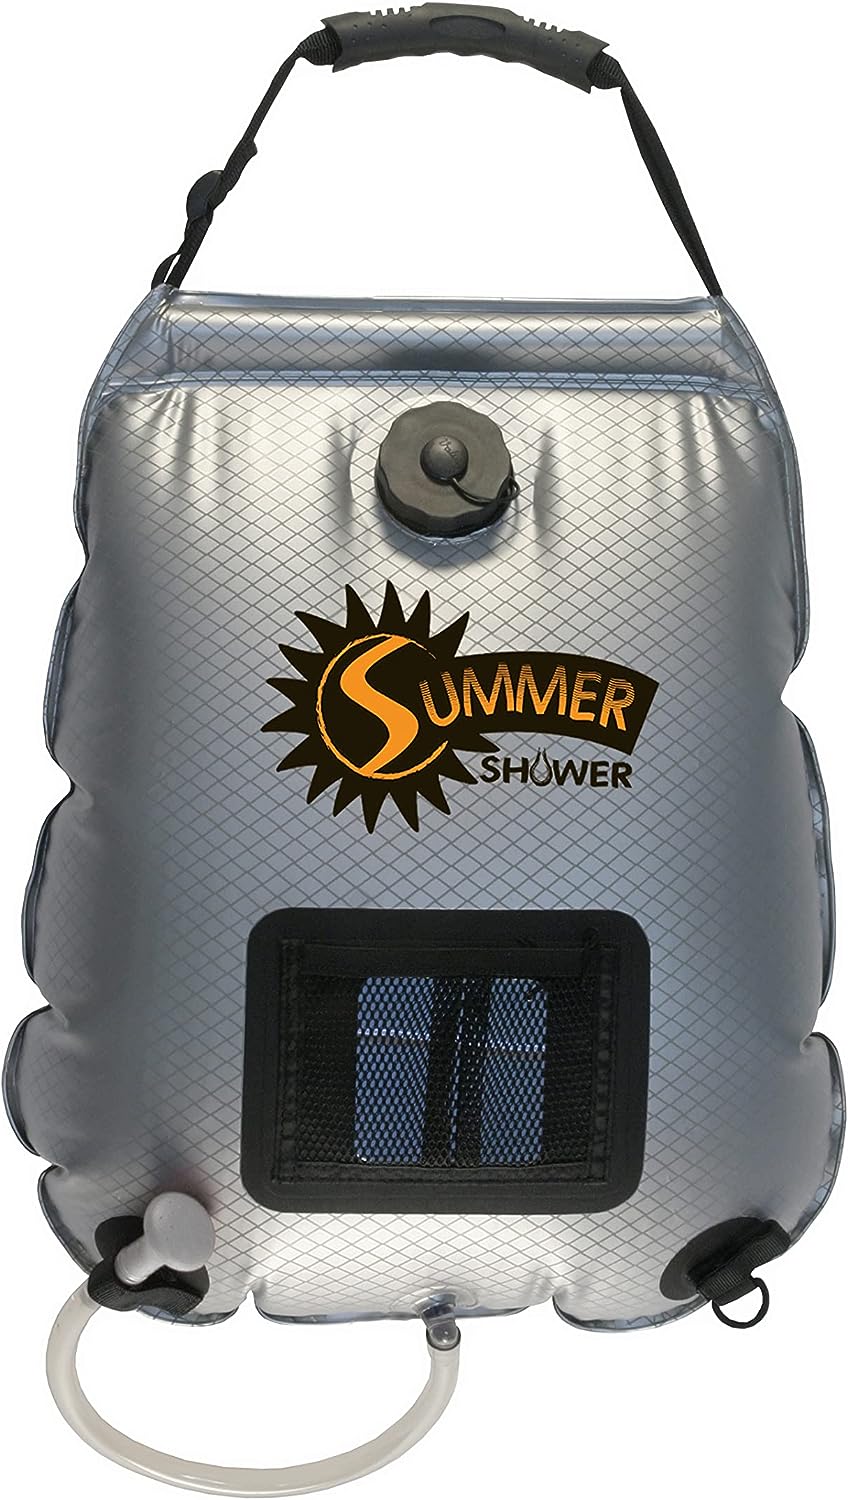 Simplify Outdoor Living: 10 Camping Products to Try